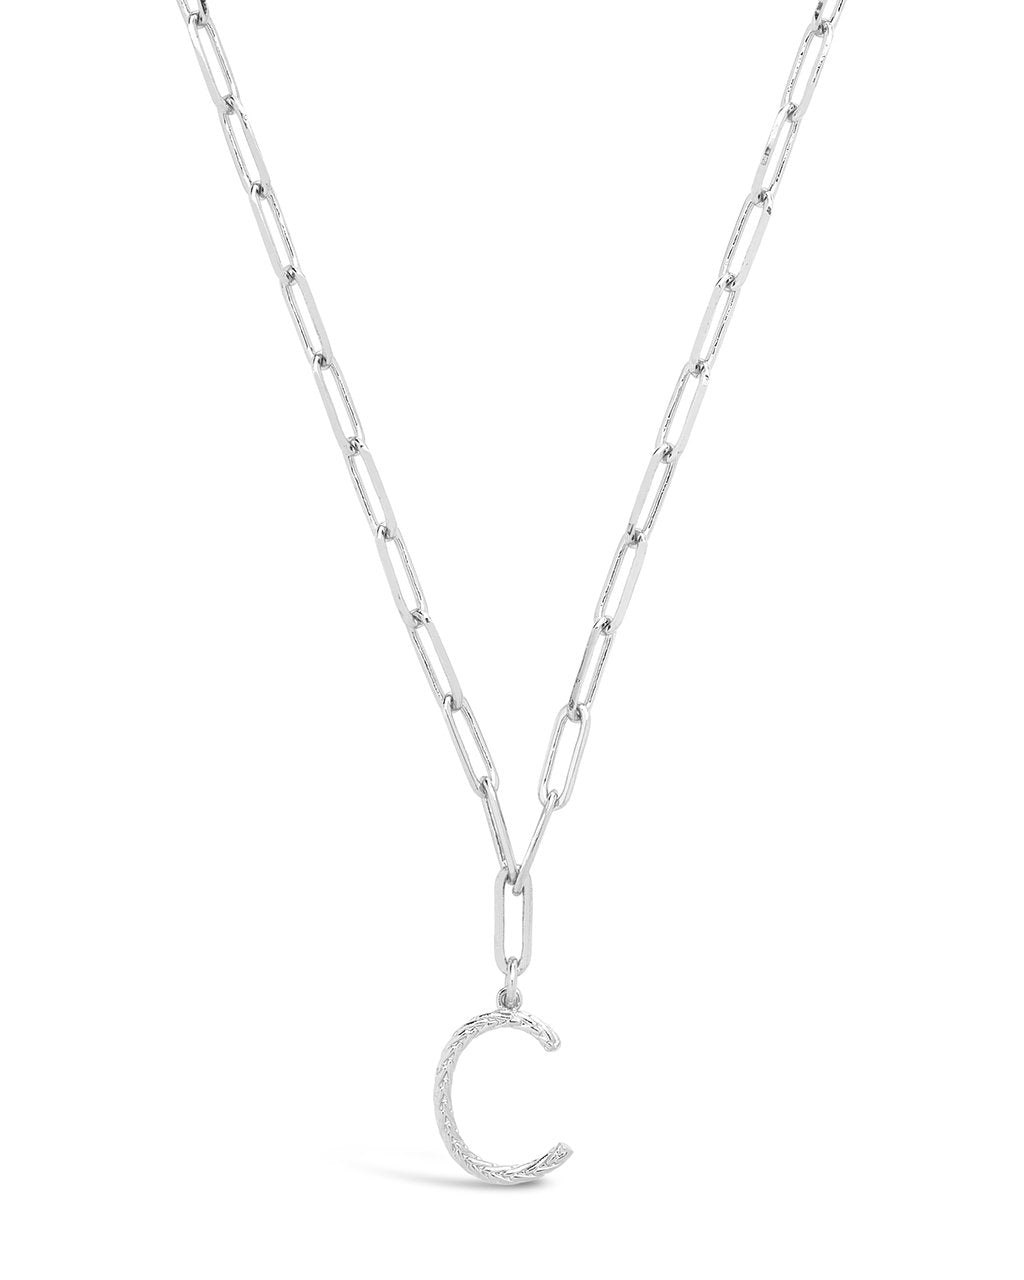 CZ Initial Necklaces Sterling Silver, 18”-20” Chain - Eleganzia Jewelry